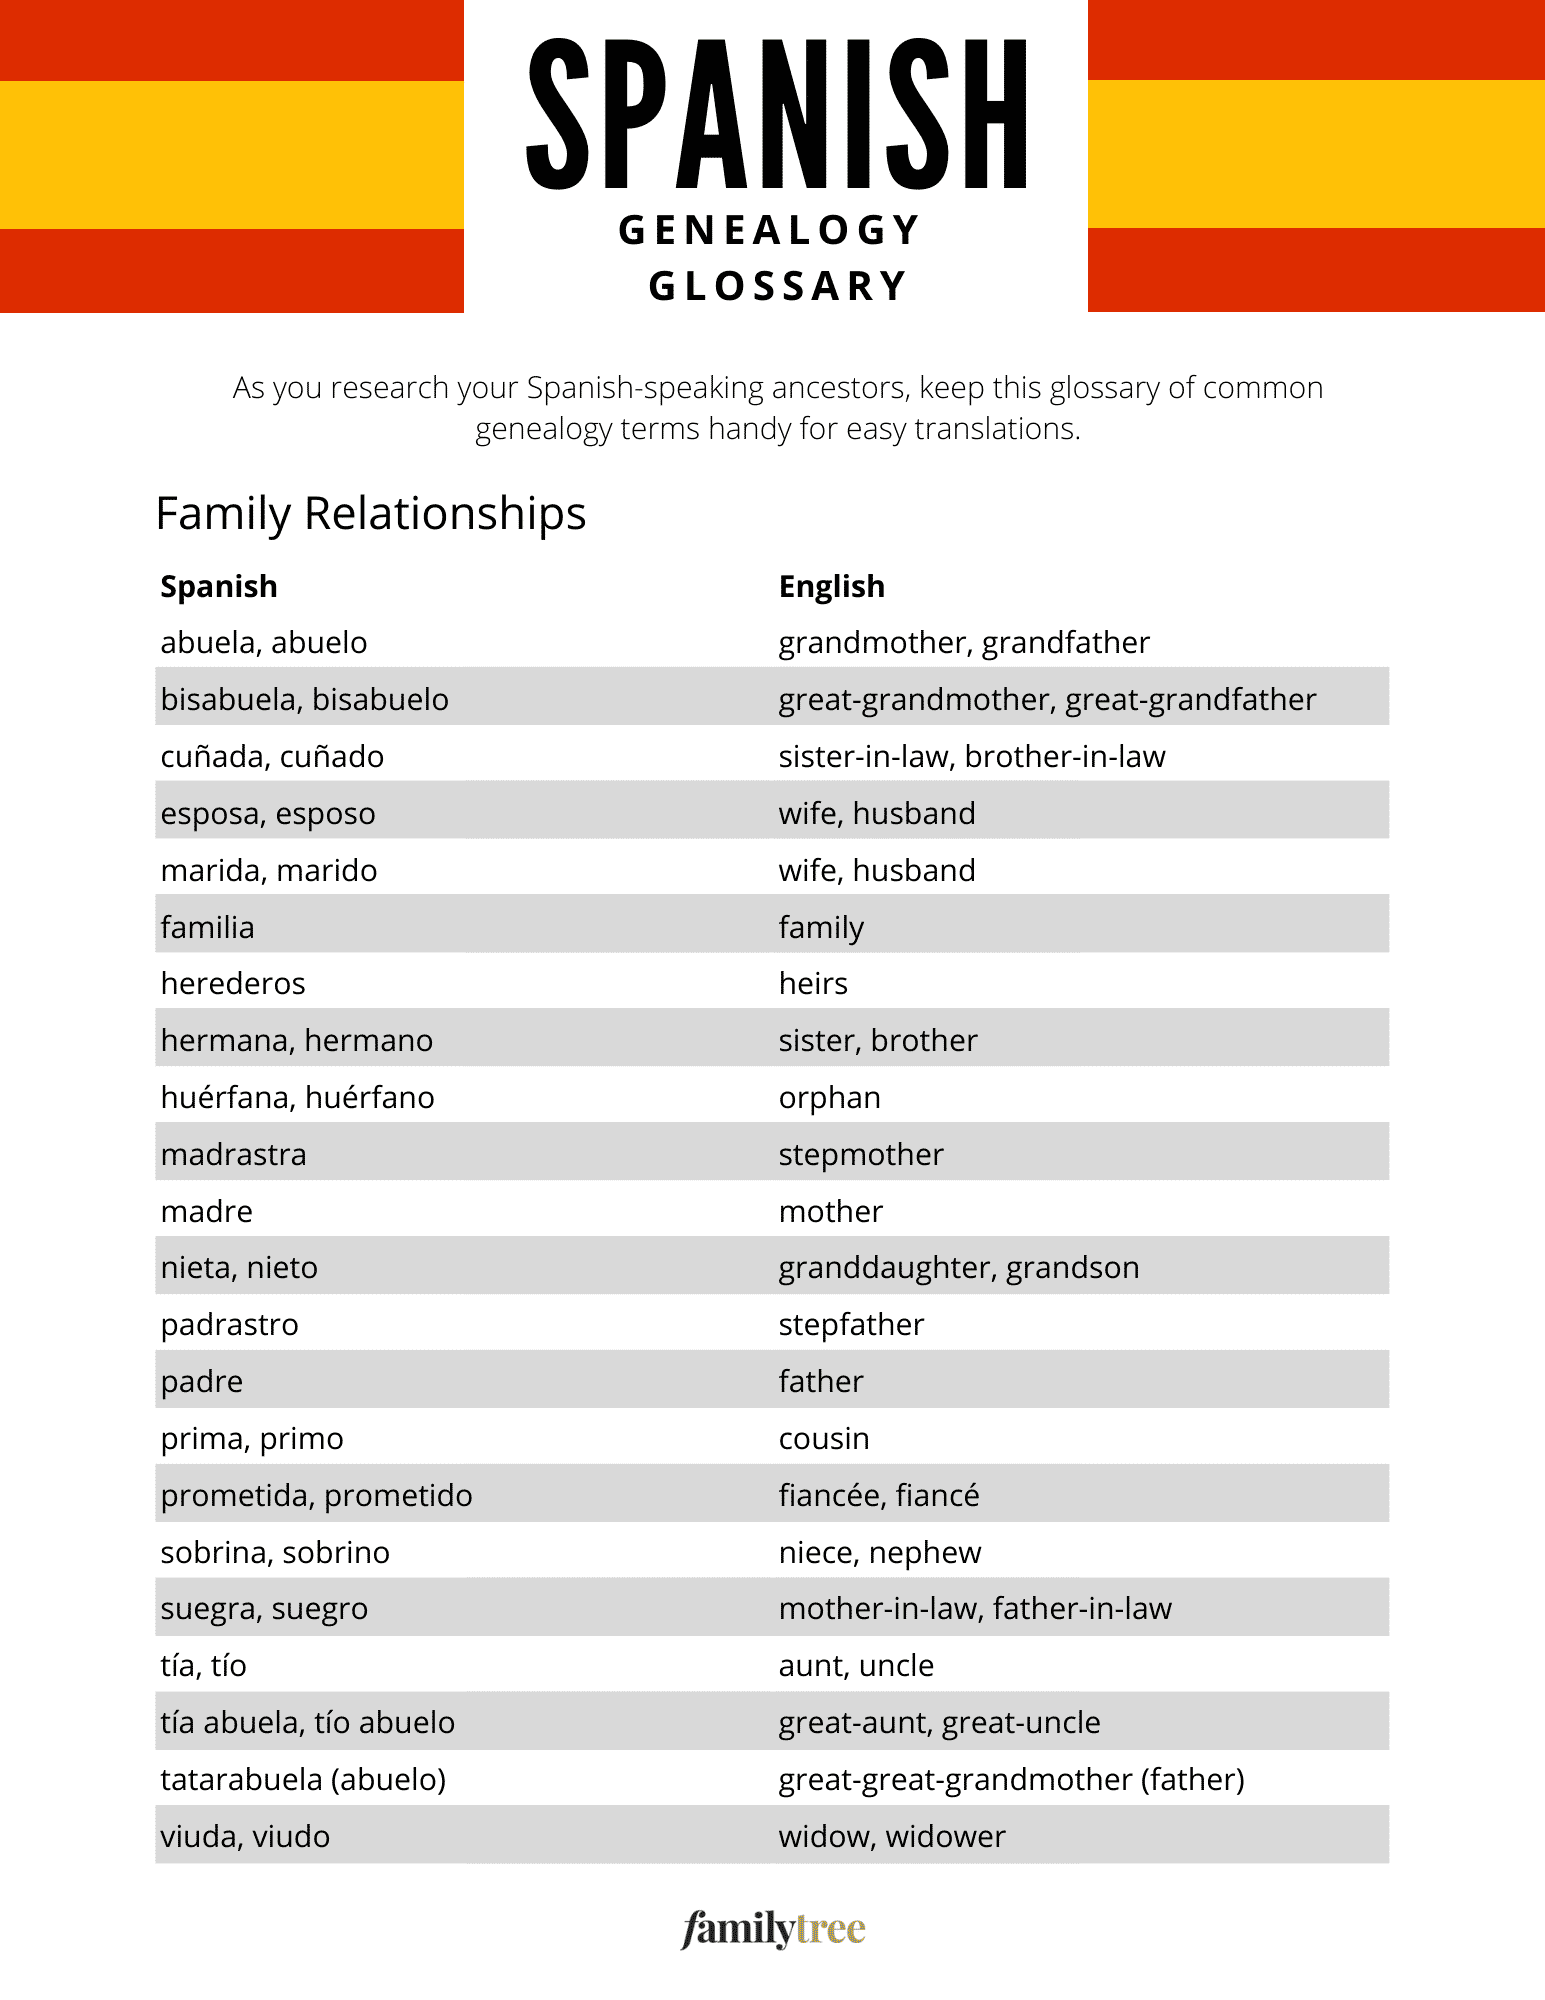 Downloadable glossary of Spanish genealogy terms.